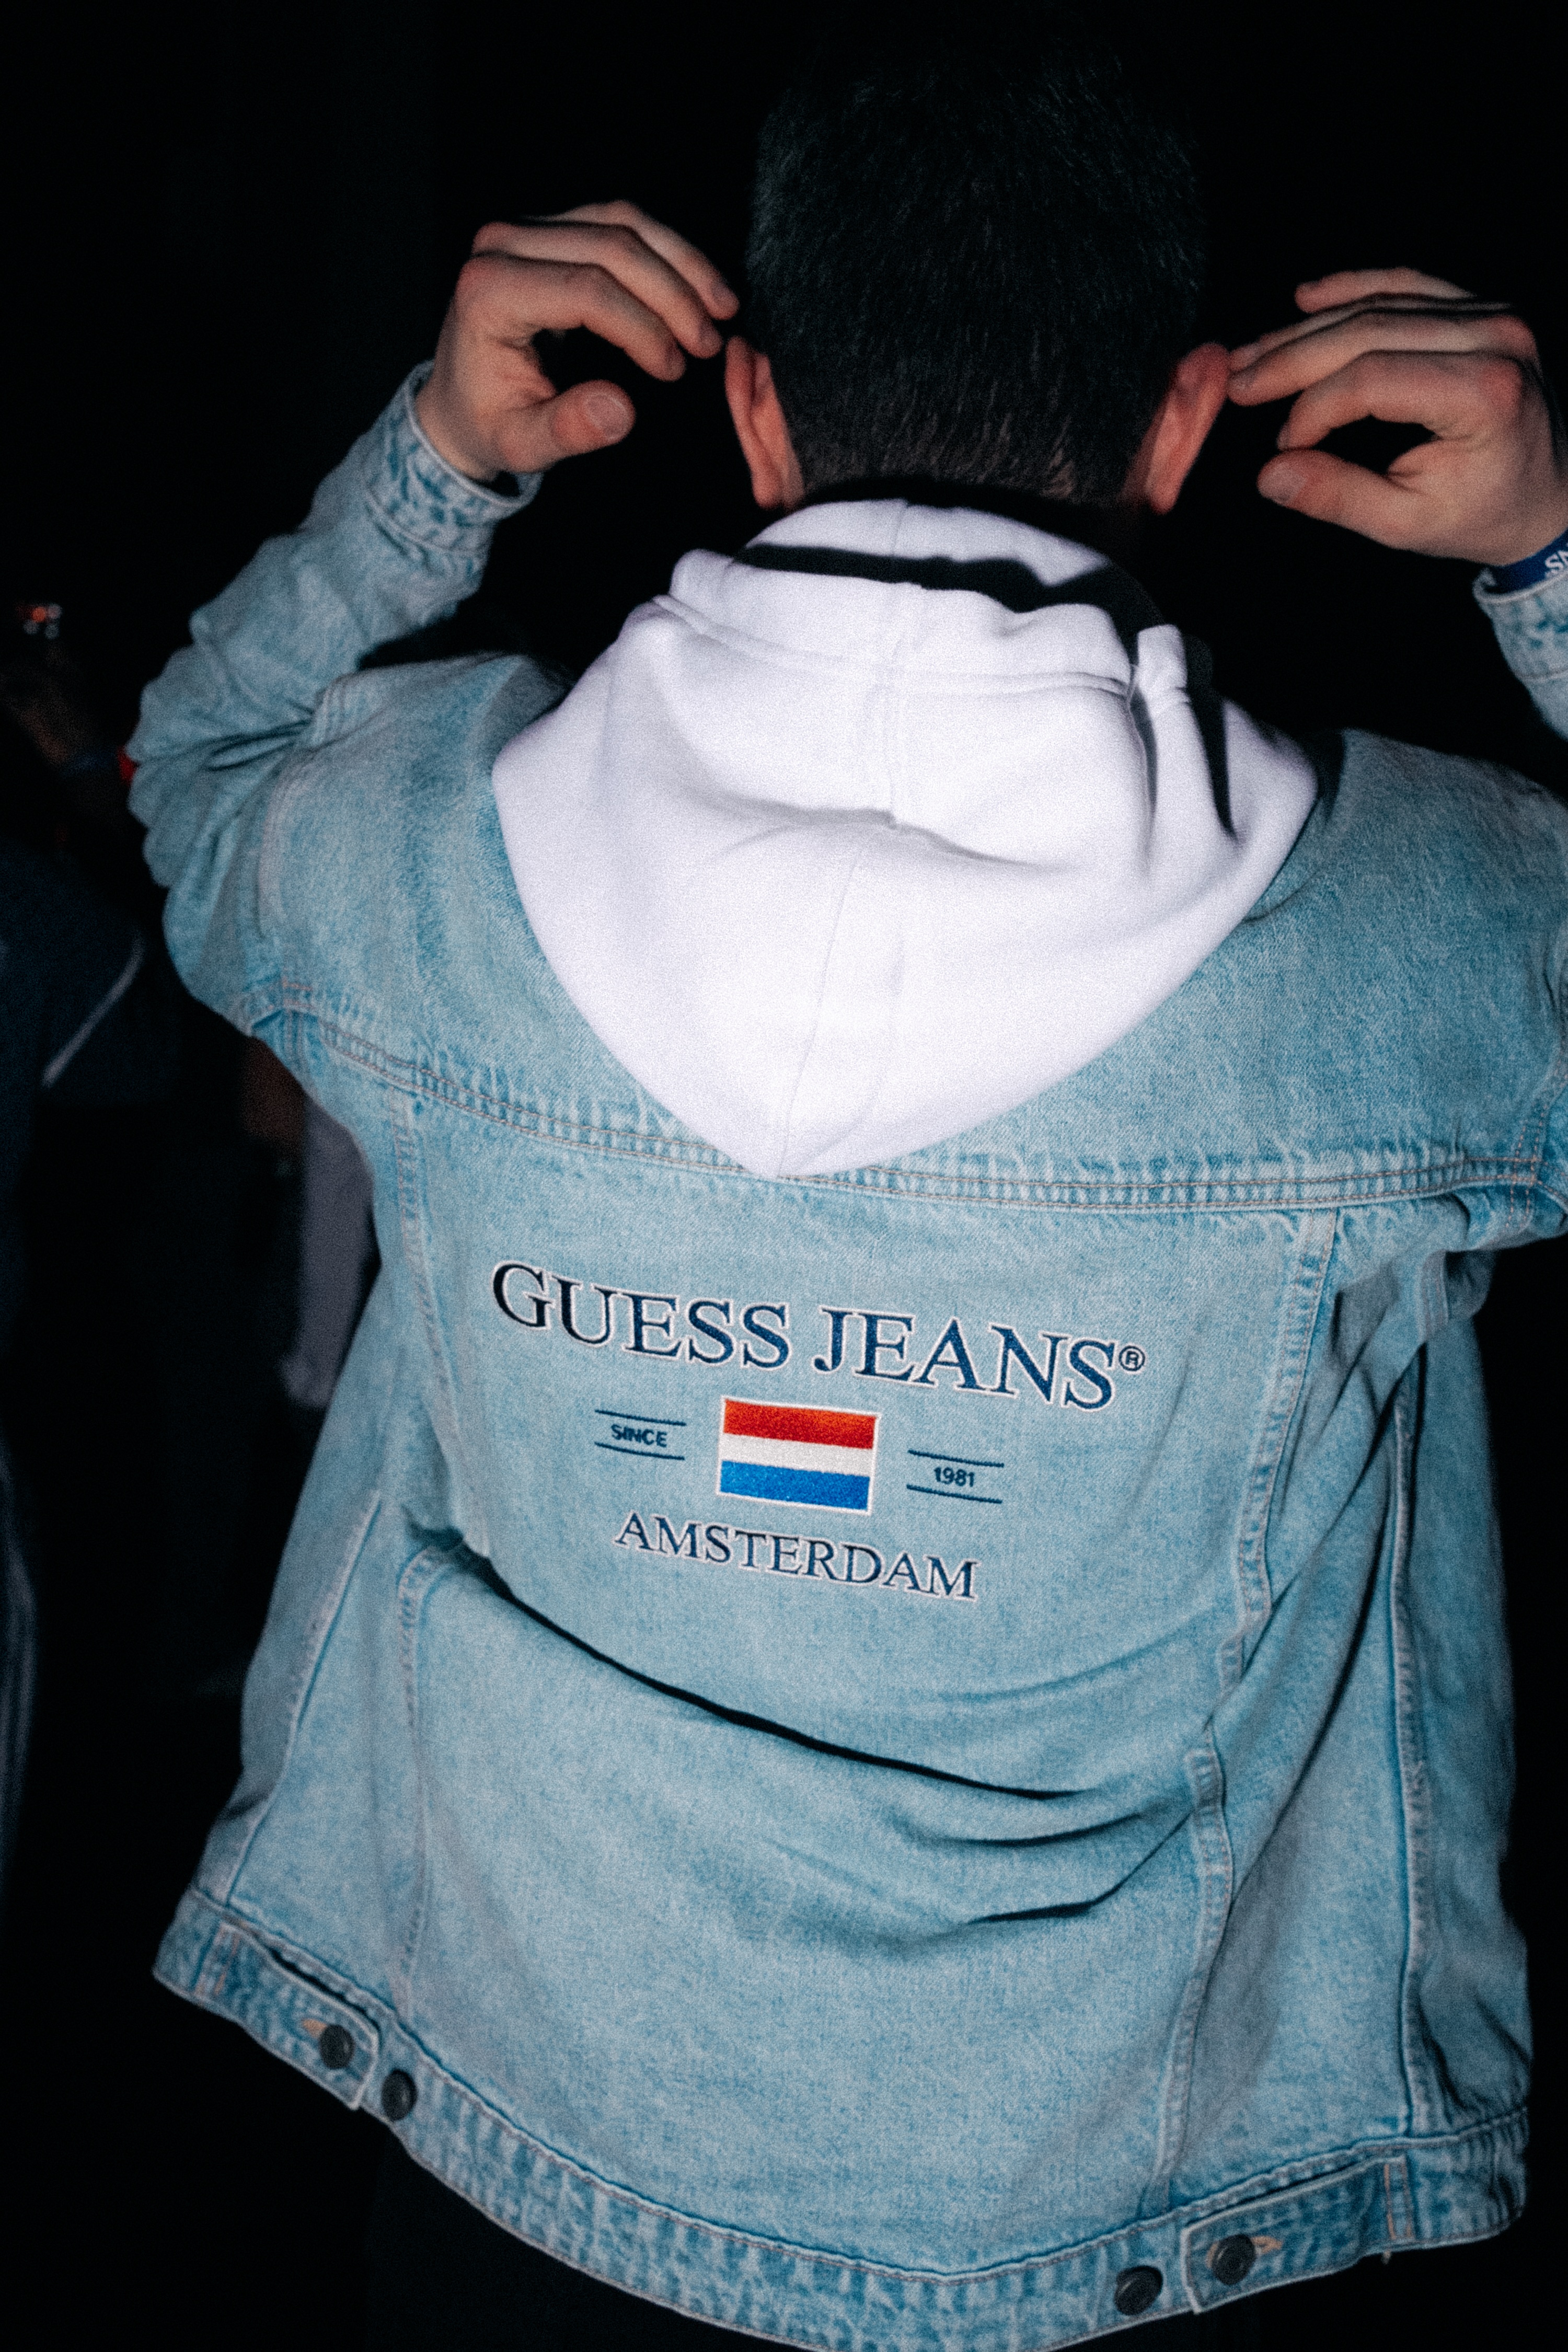 GUESS JEANS takes Amsterdam